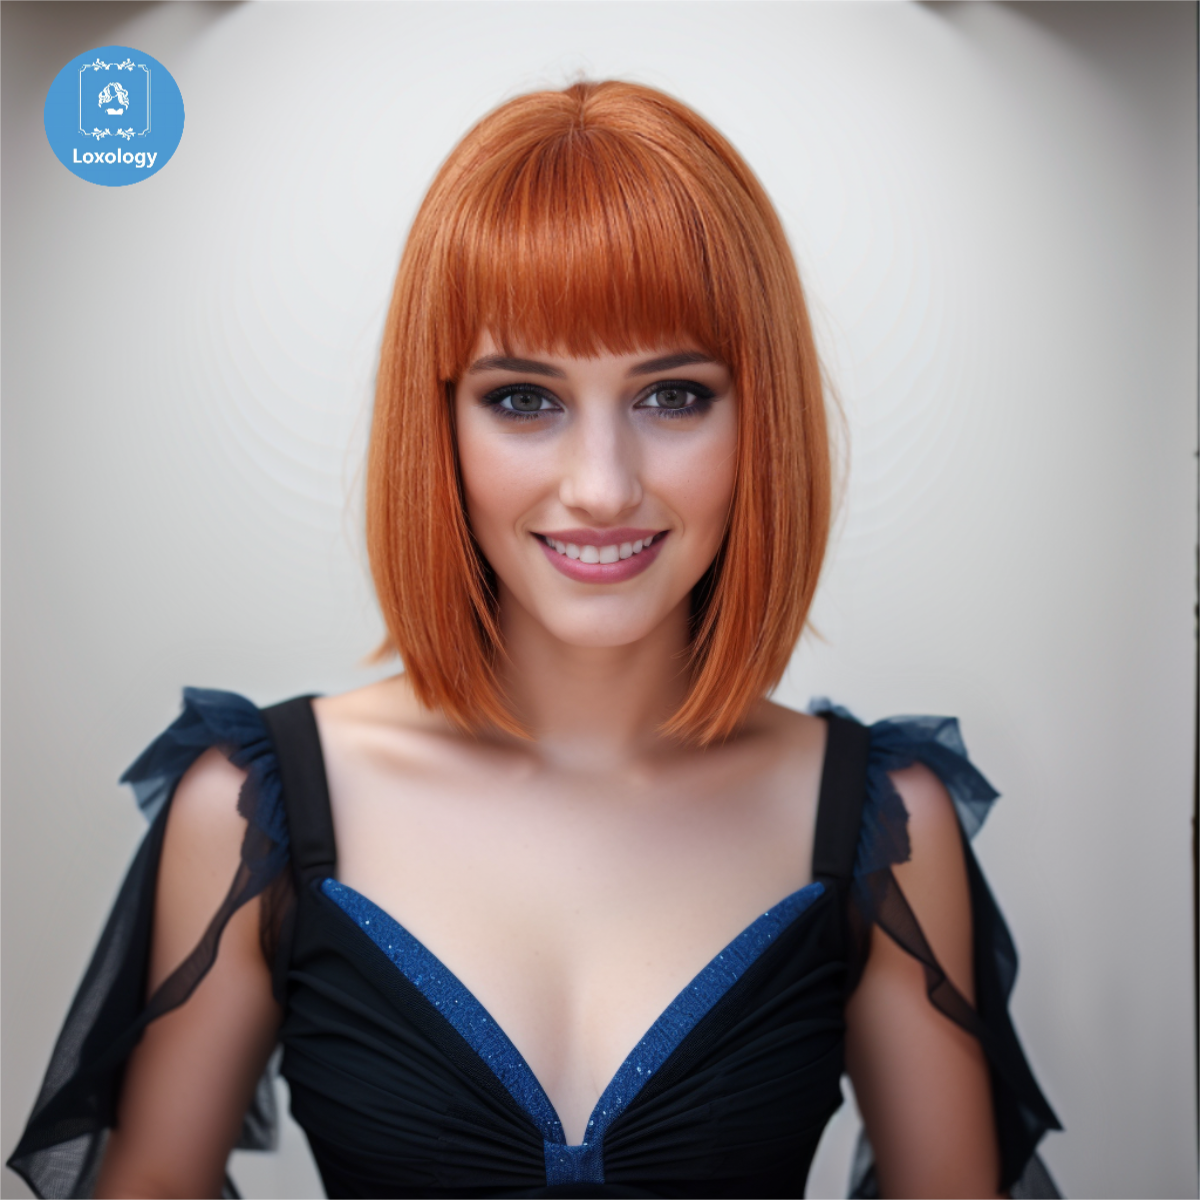 【Addison】Loxology | 12Inch short straight bobo wigs orange with bangs wigs for women